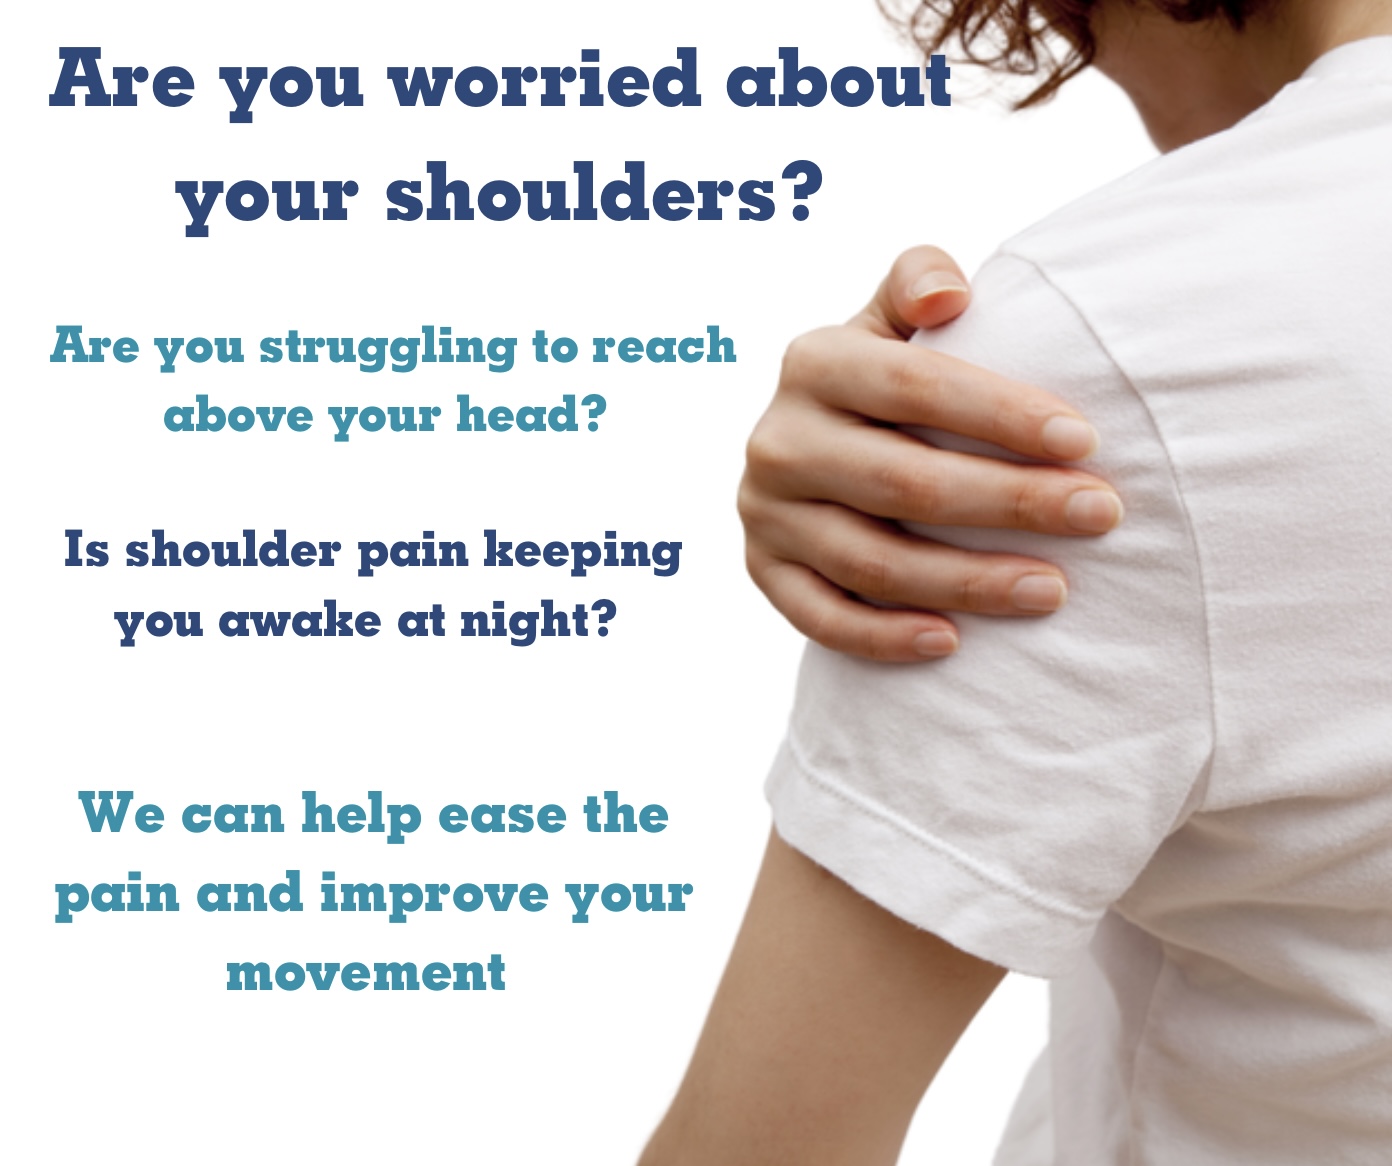 Person holding there shoulder - text reads Are you worried about your shoulders? Are you struggling to reach above your head? I shoulder pain keeping you awake? WE can help easer your pain and improve your movement.